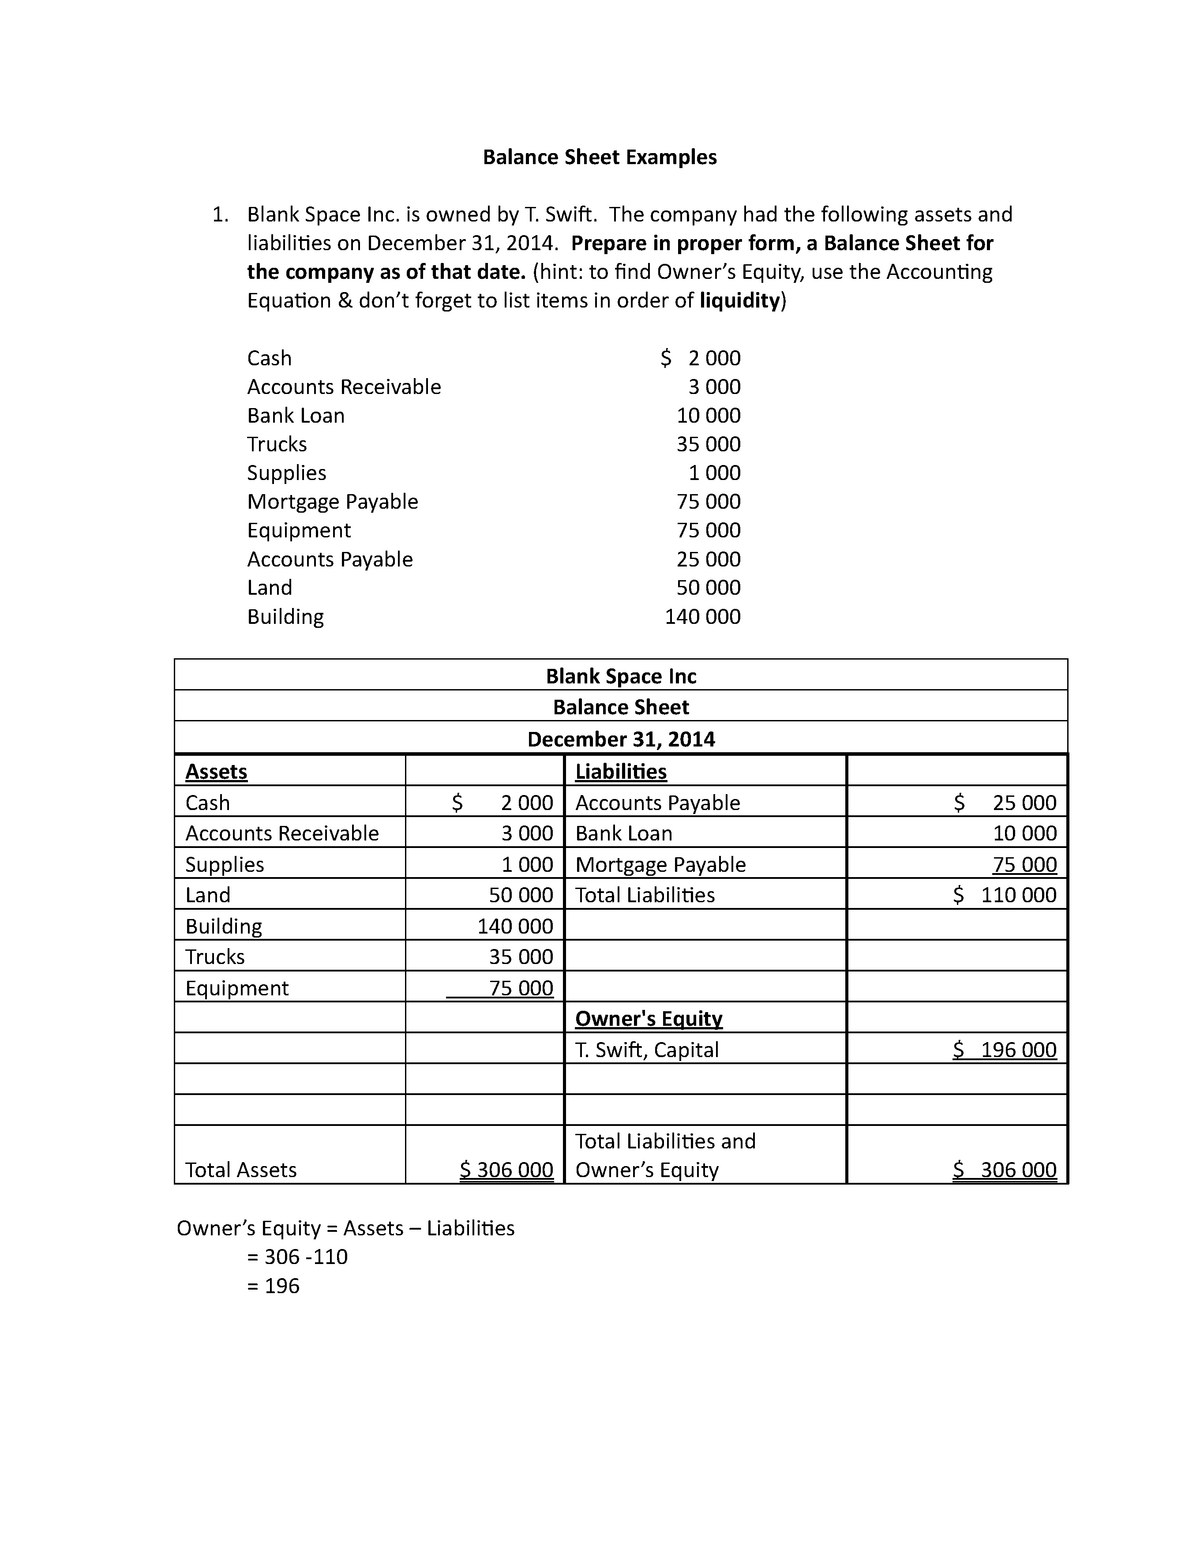 21 - Balance Sheet Answers - Balance Sheet Examples Blank Space Intended For Assets And Liabilities Worksheet